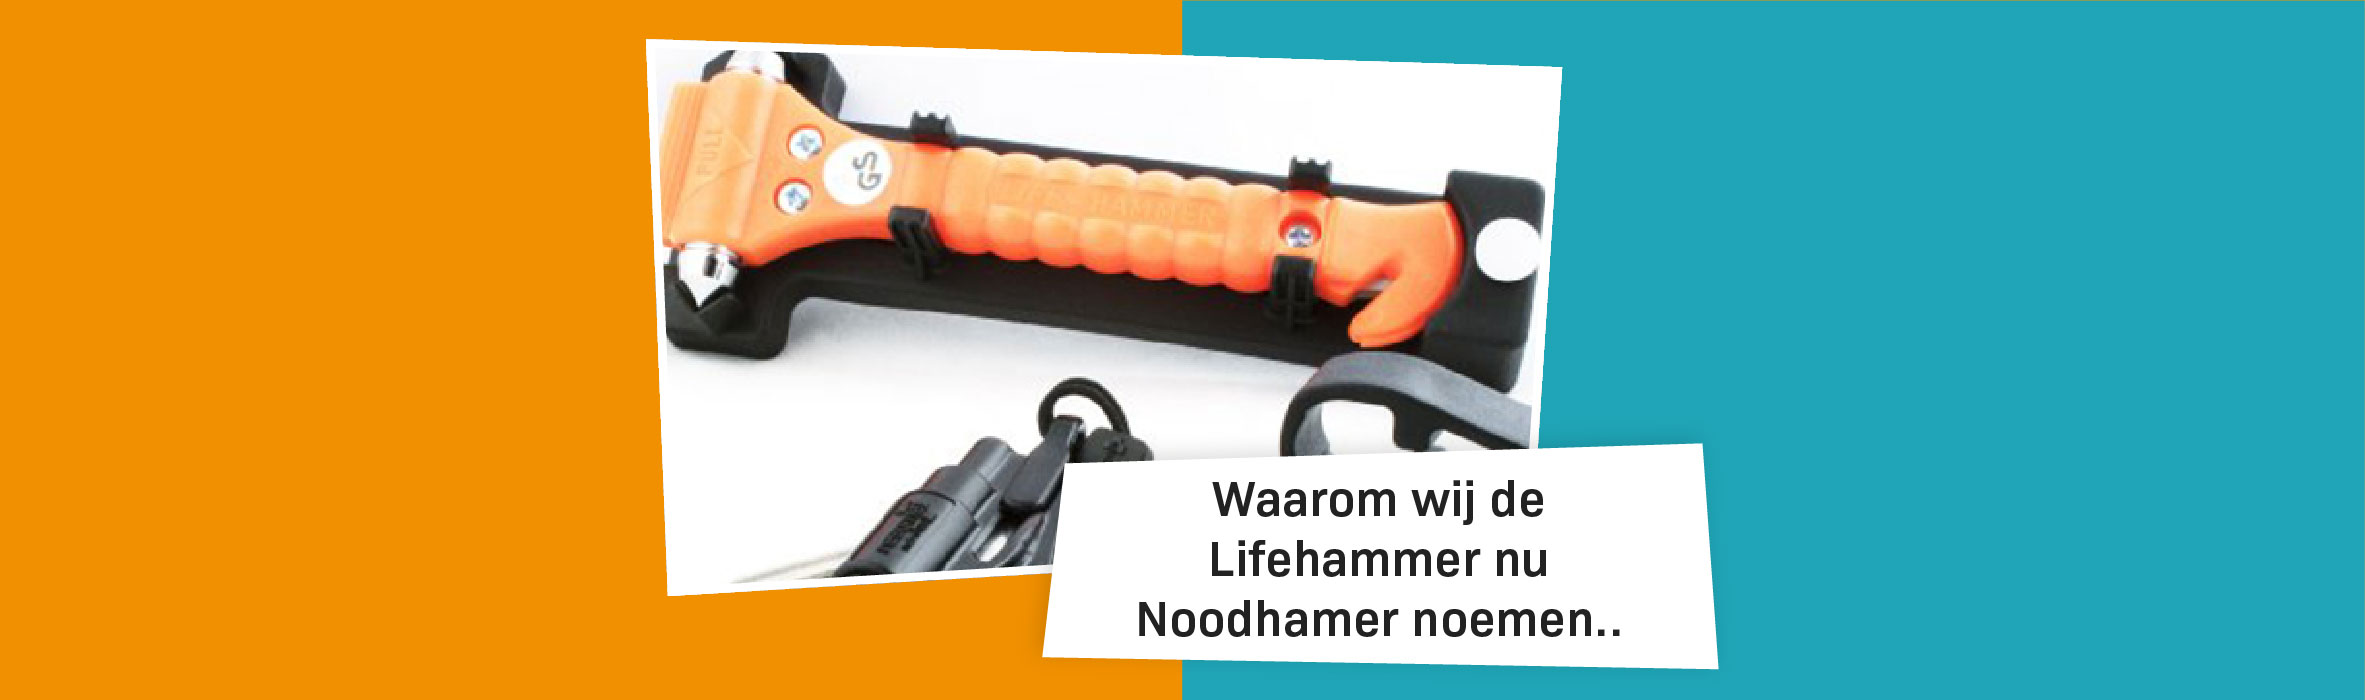 Why We Now Call The Lifehammer Emergency Hammer